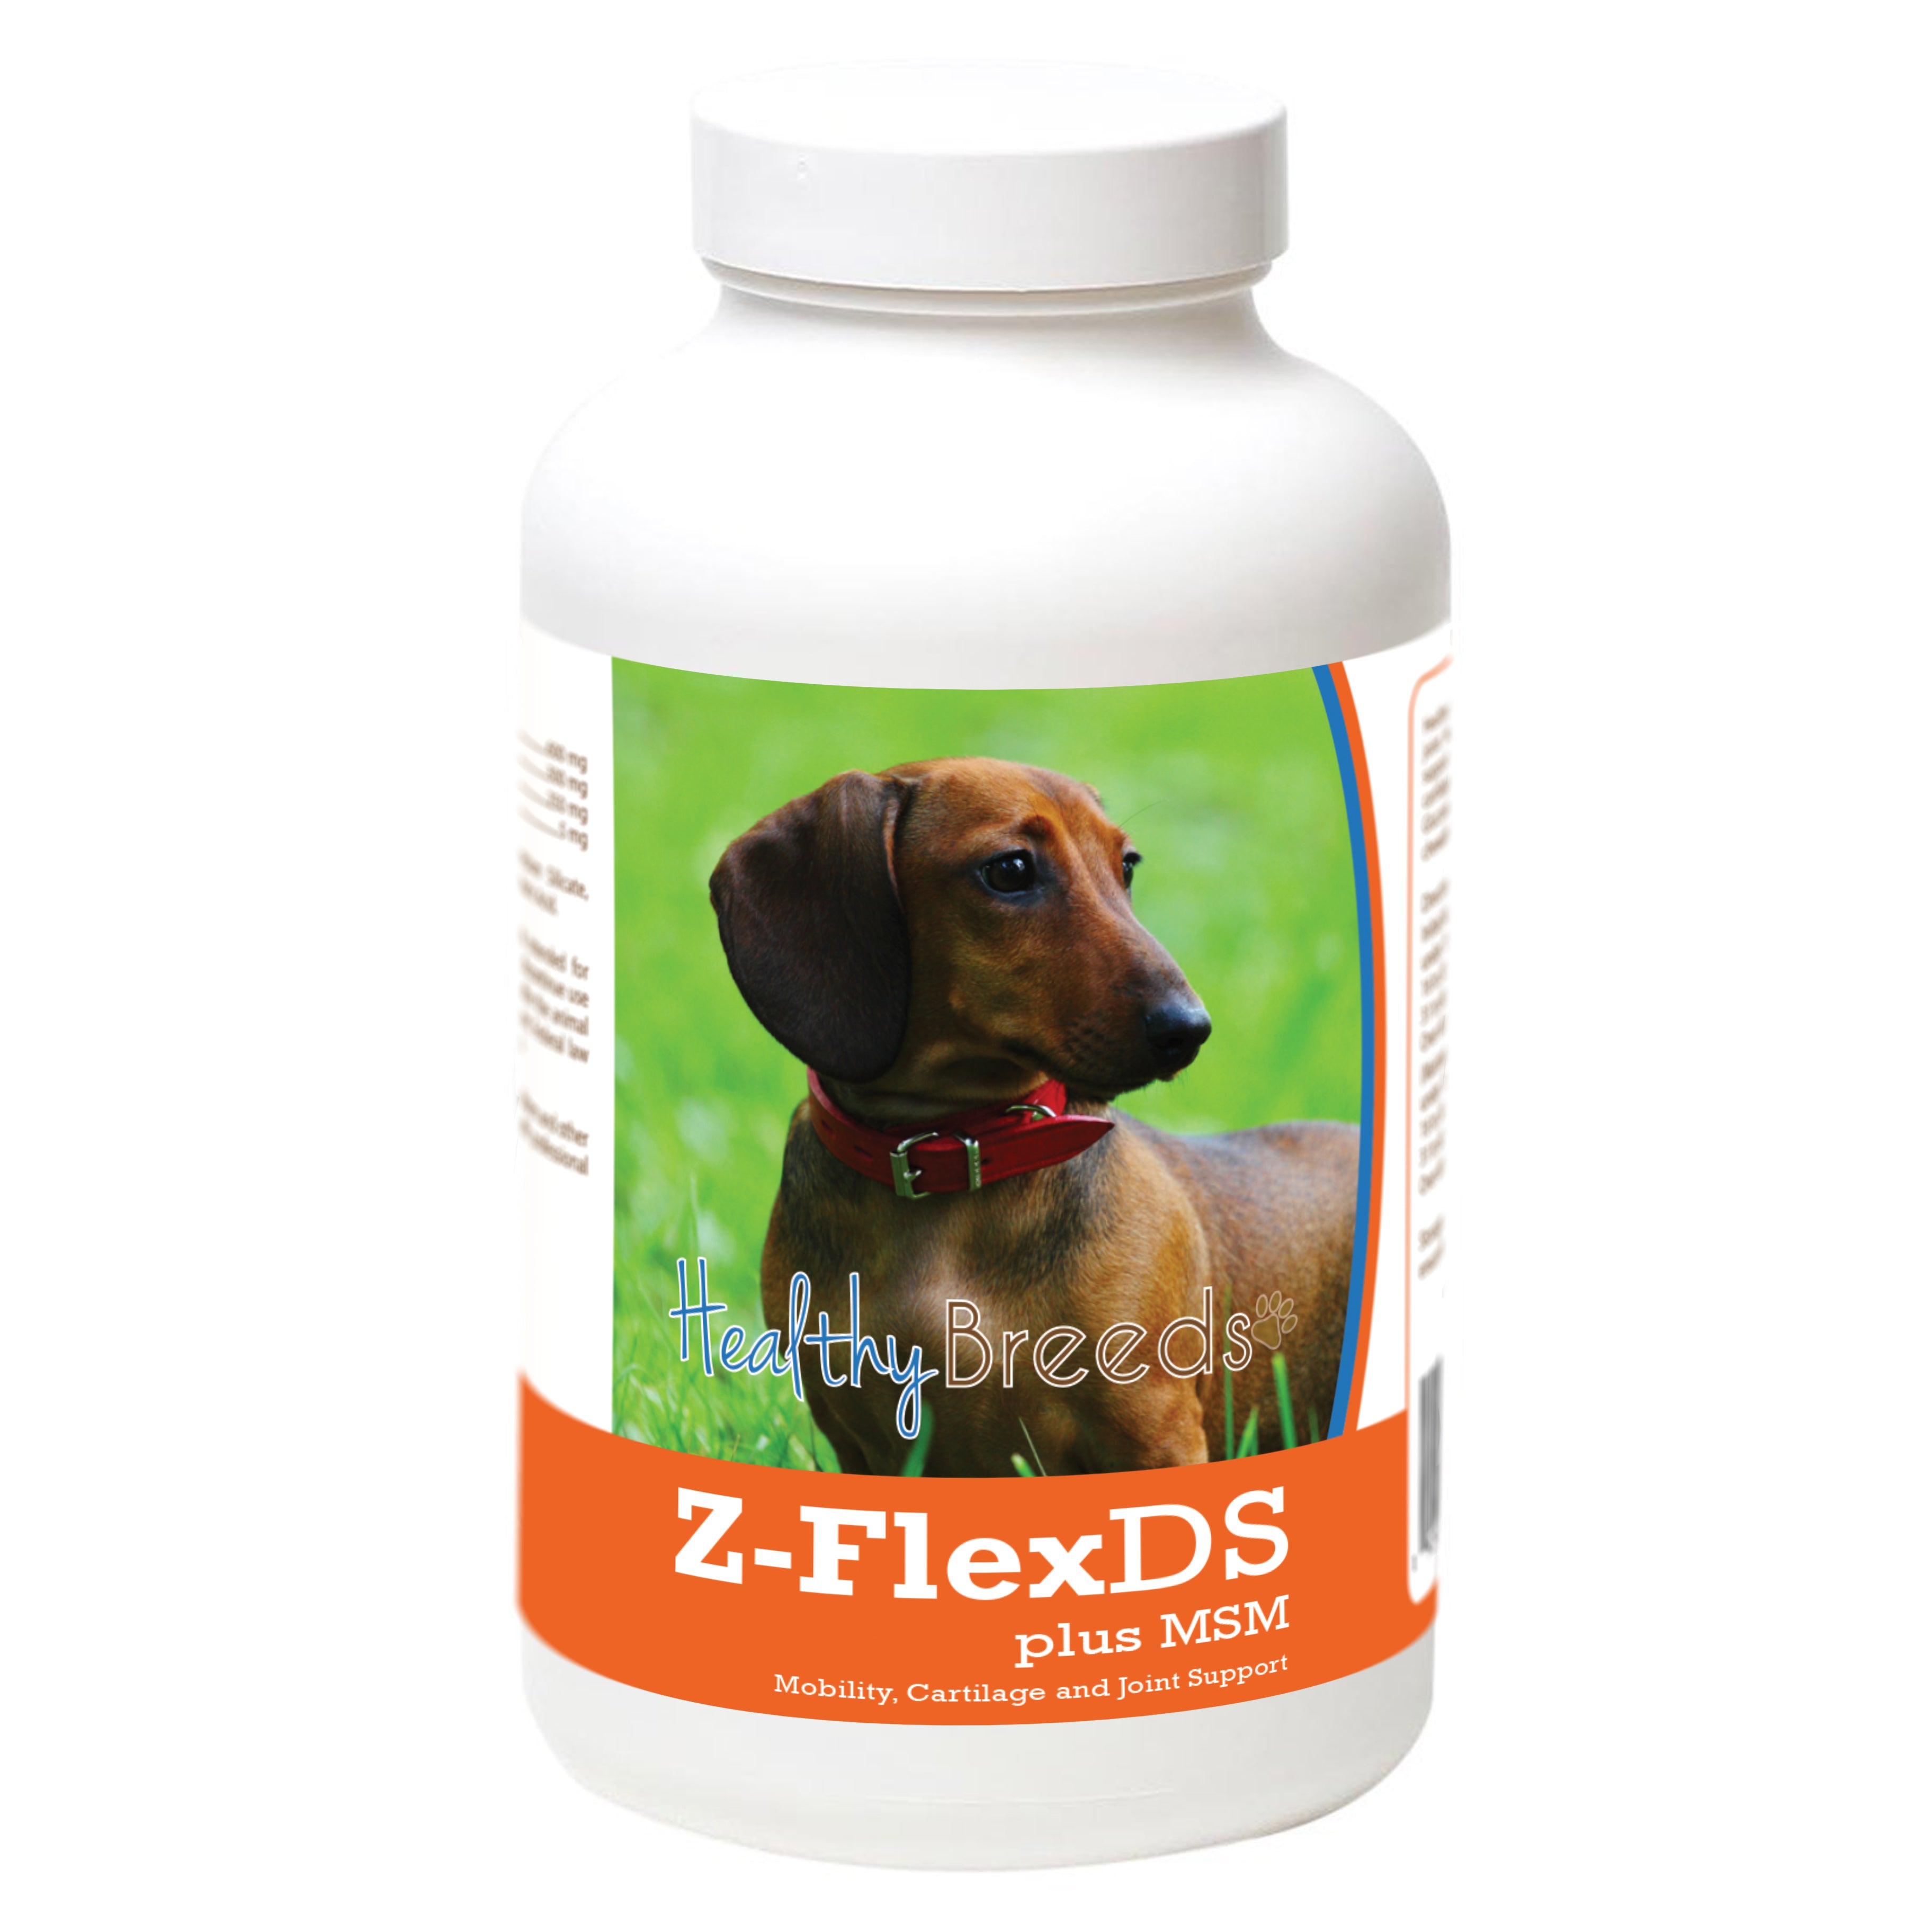 Dachshund Z-FlexDS plus MSM Chewable Tablets 60 Count